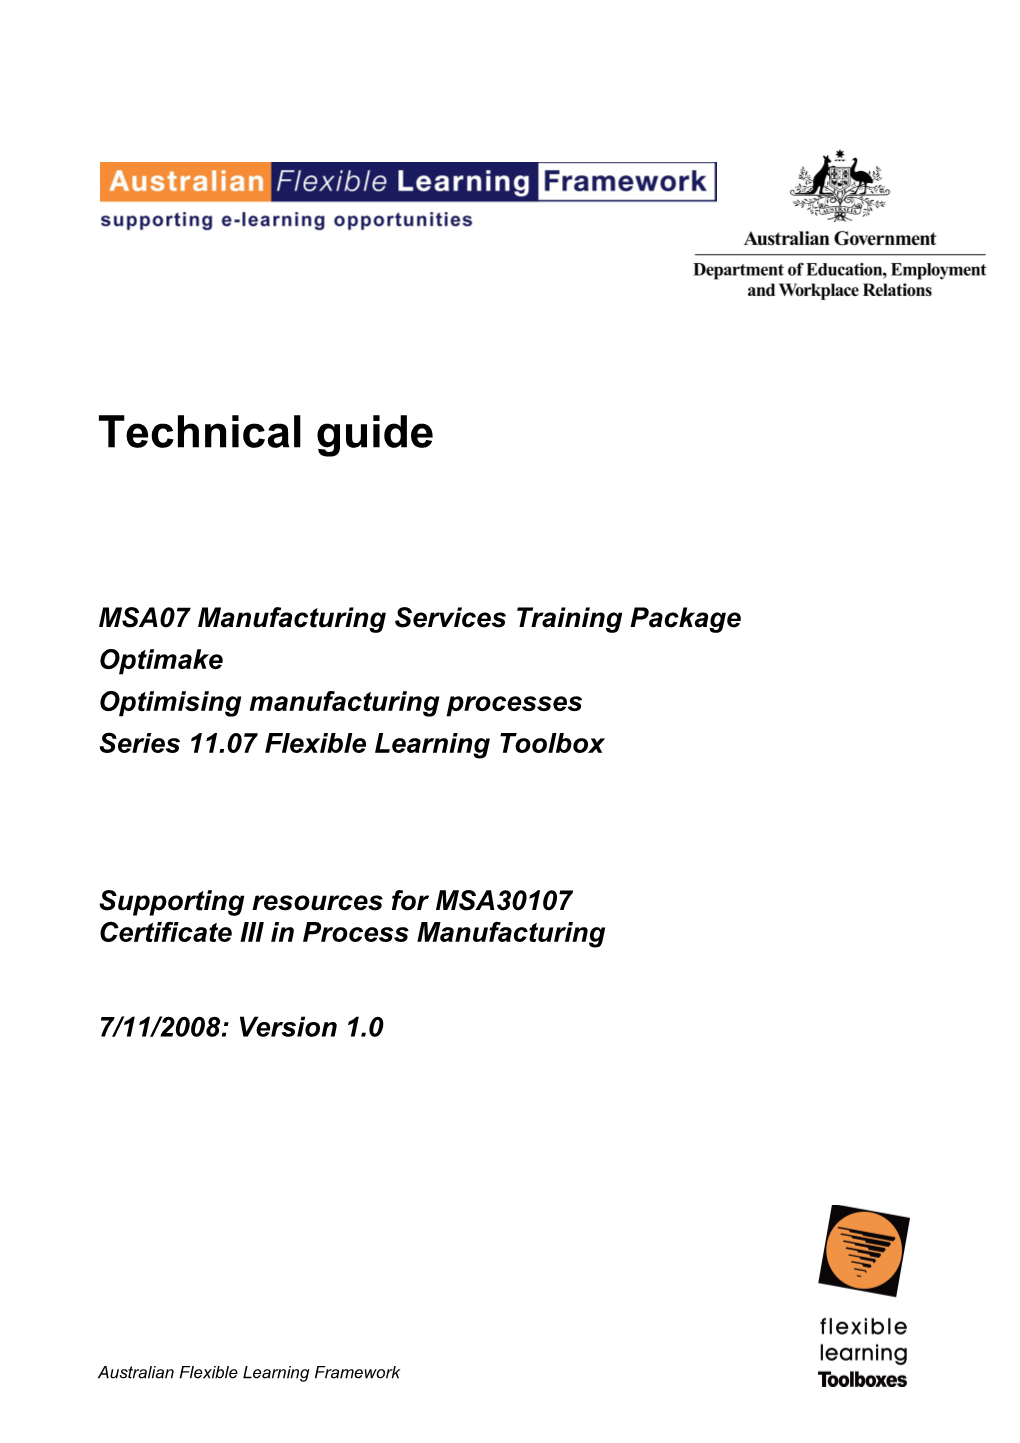 Series 11 Technical Specifications and Technical Guide Template